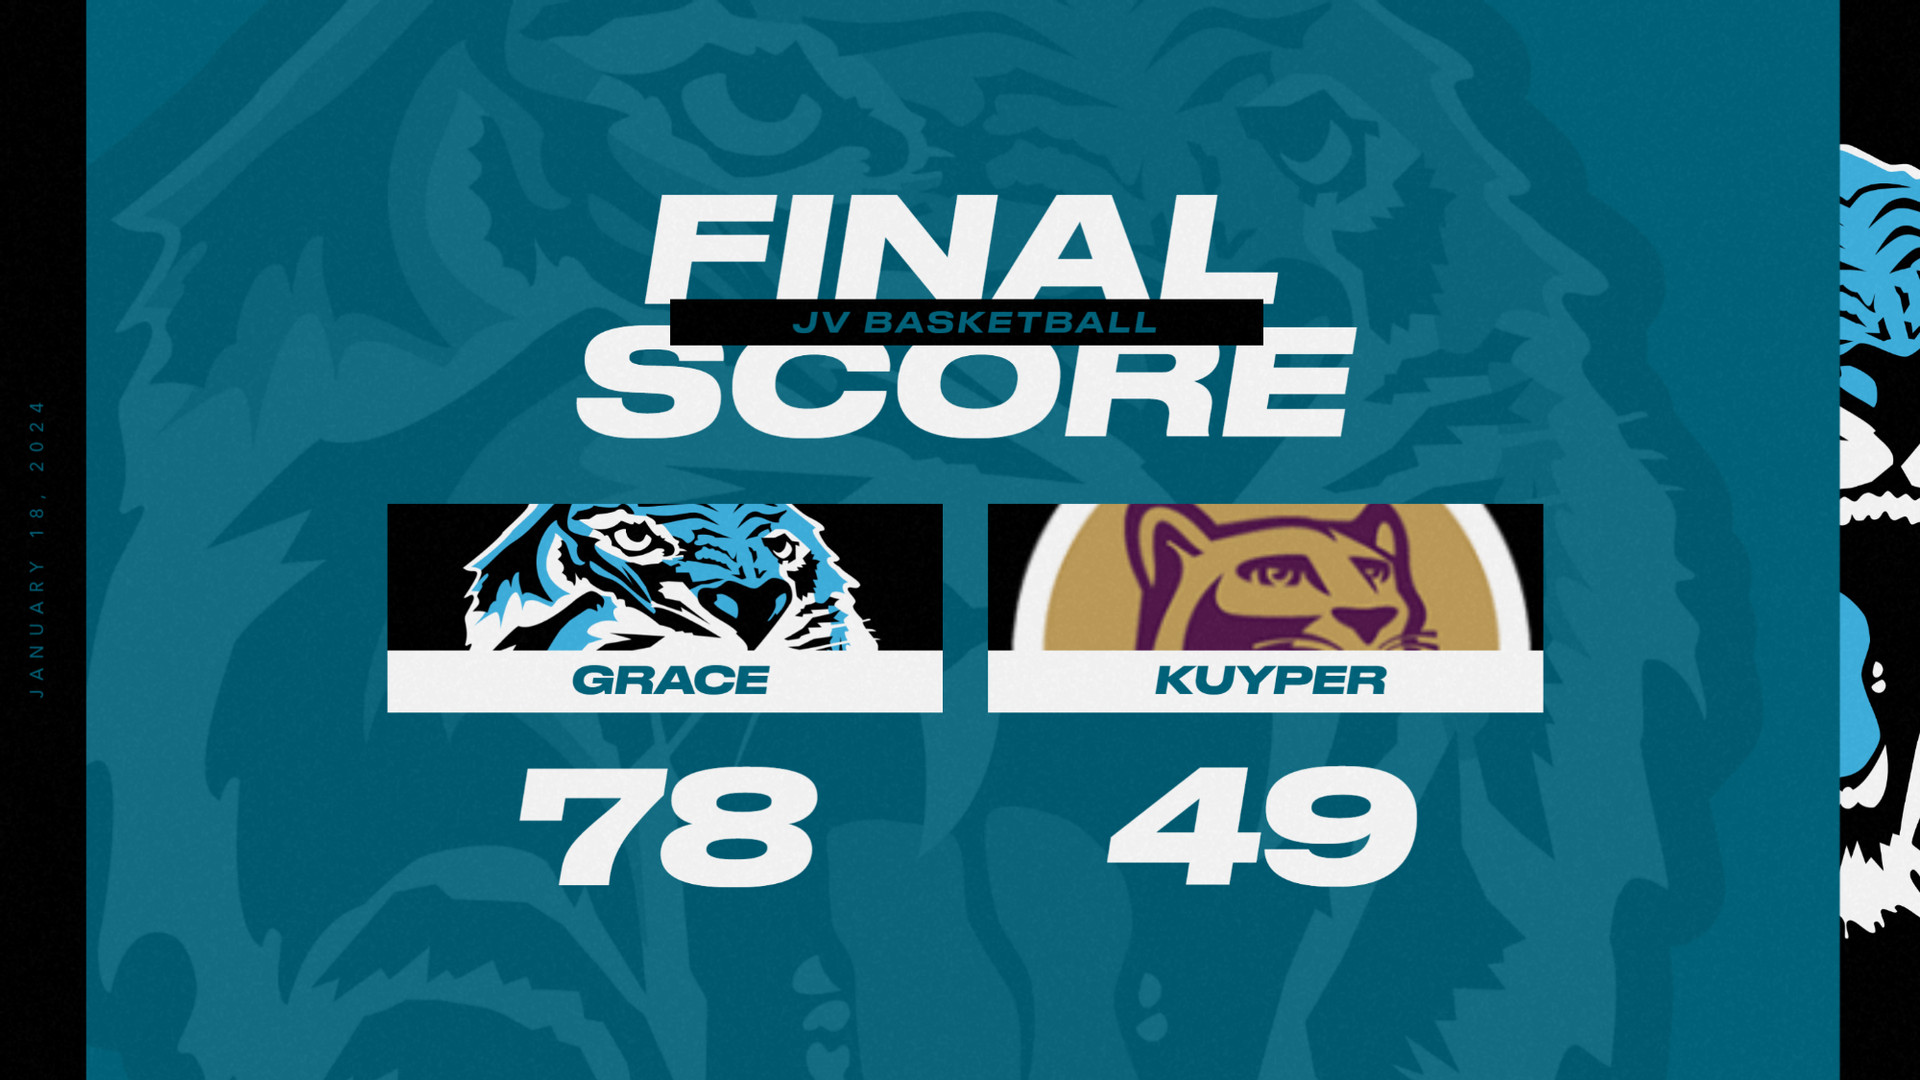 Strong Second Half Leads To 78-49 Victory Over Kuyper